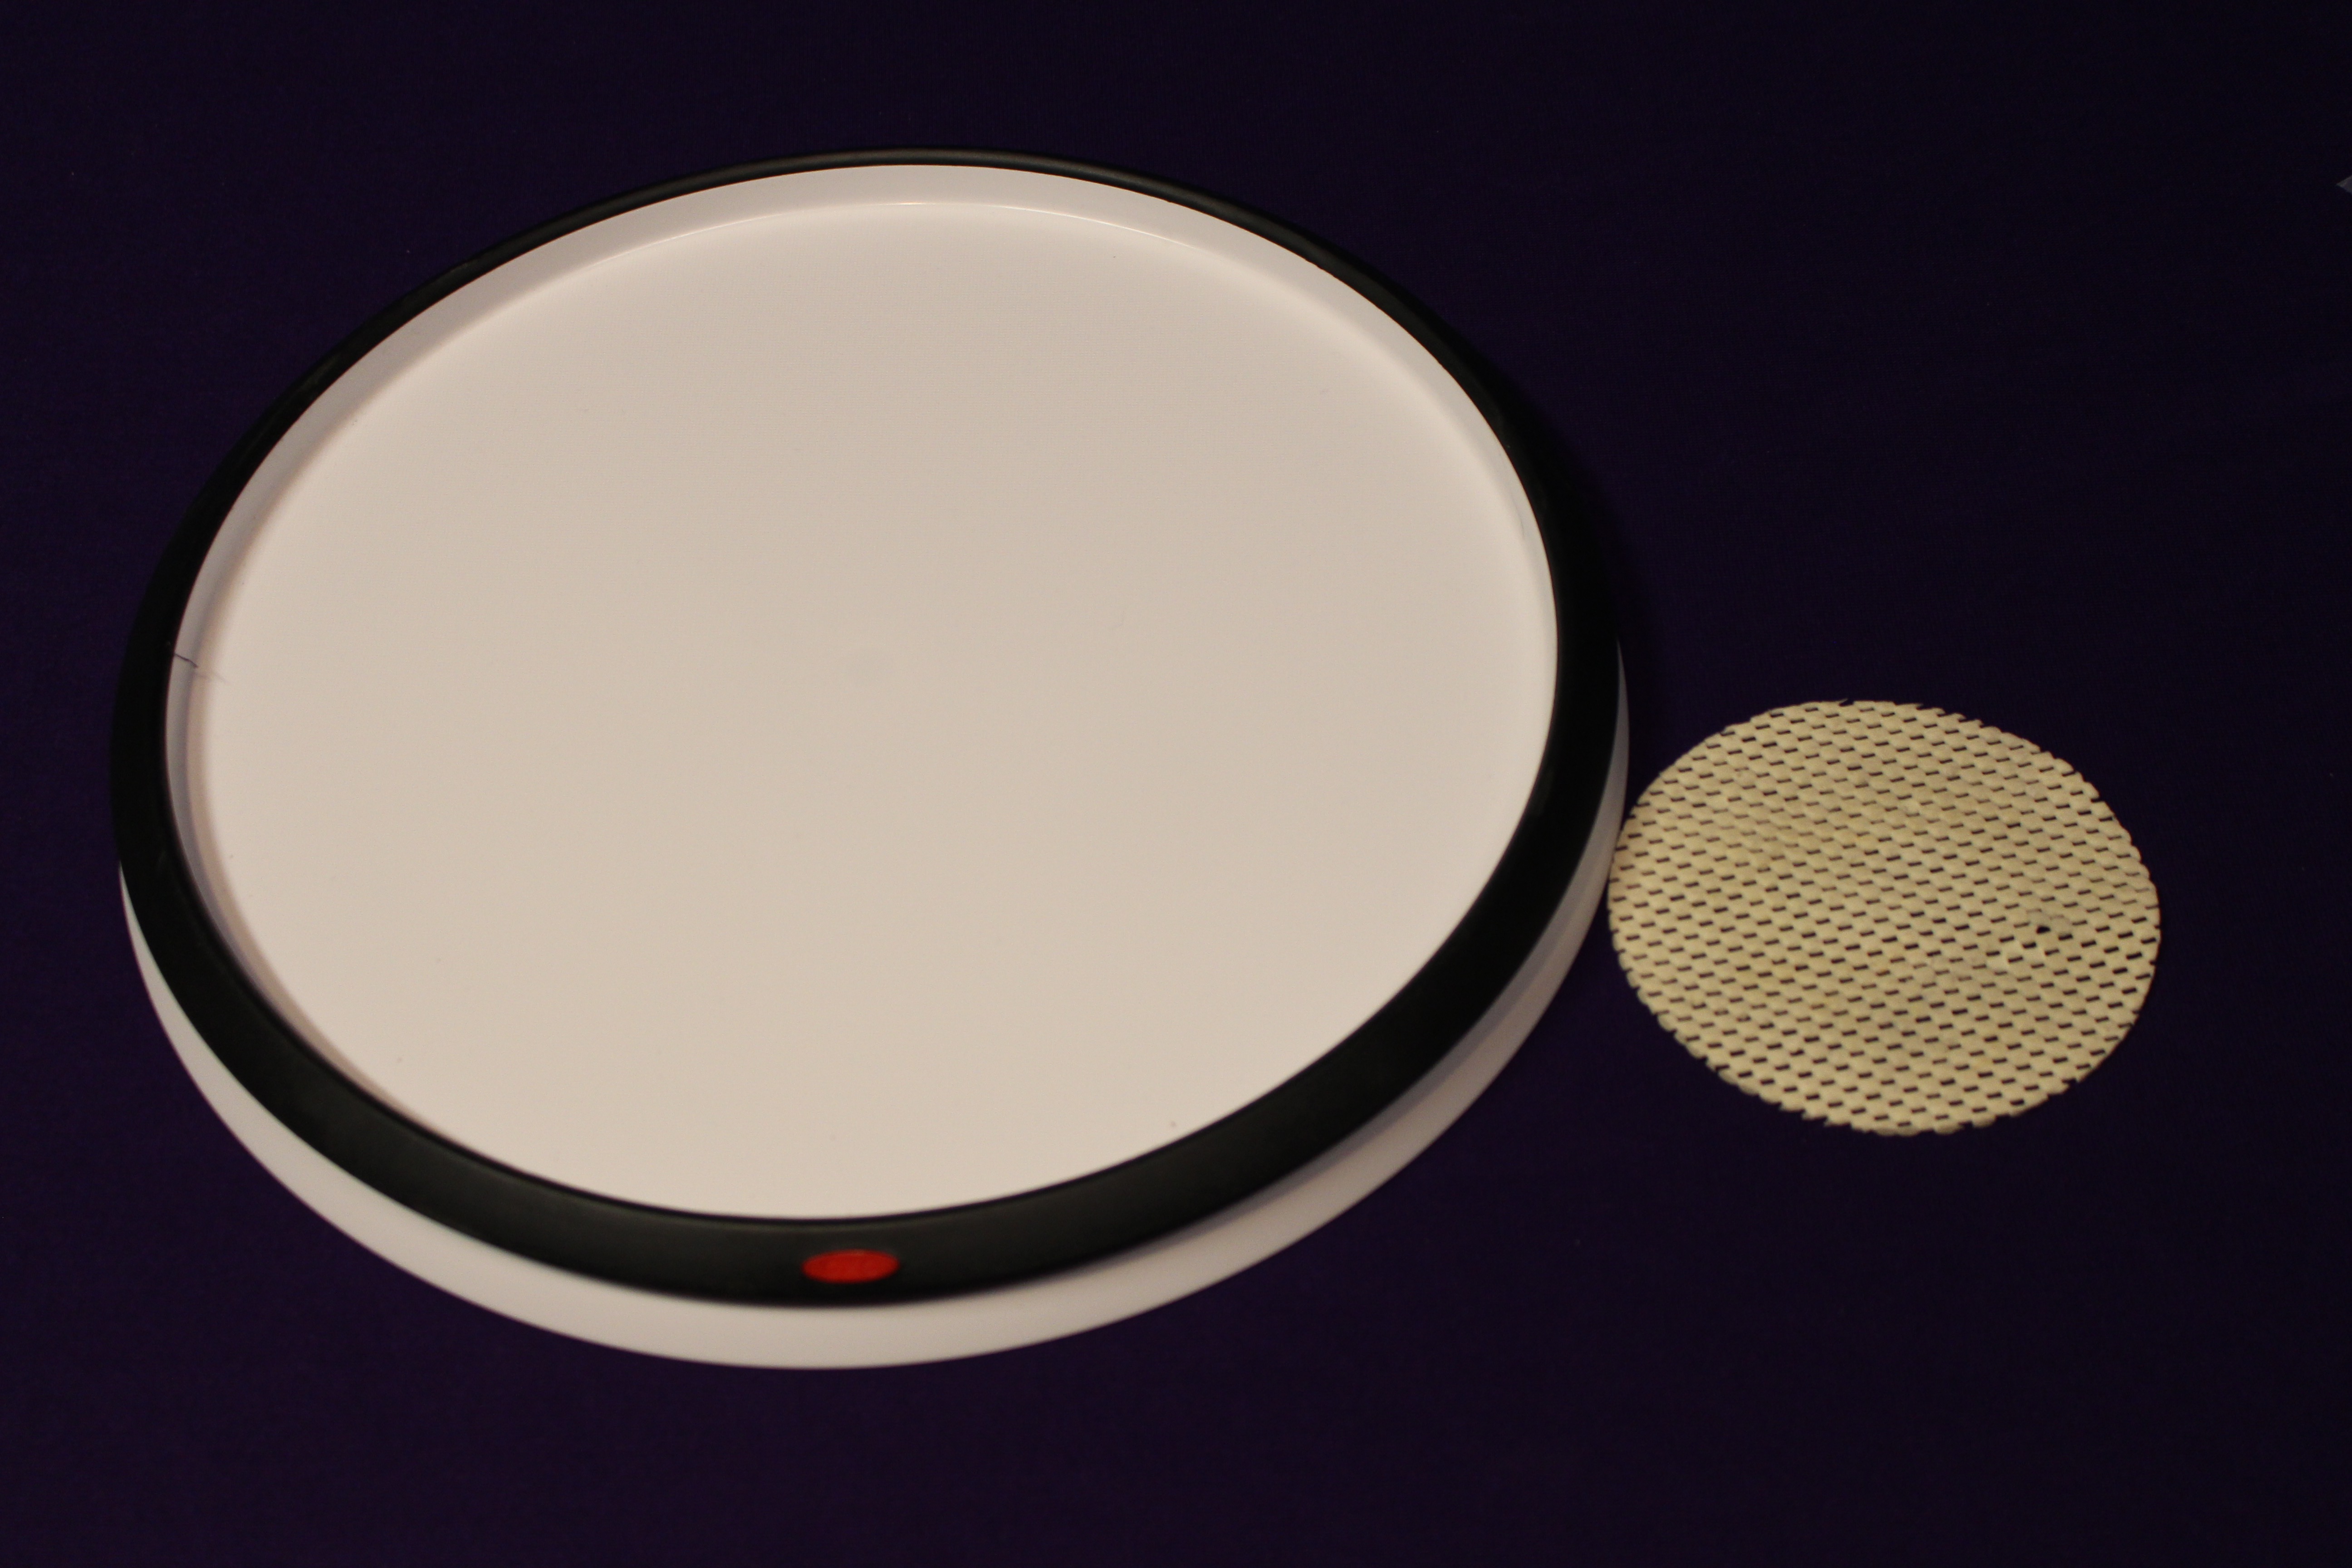 OXO table and jar-gripper pad seen from angled overhead view